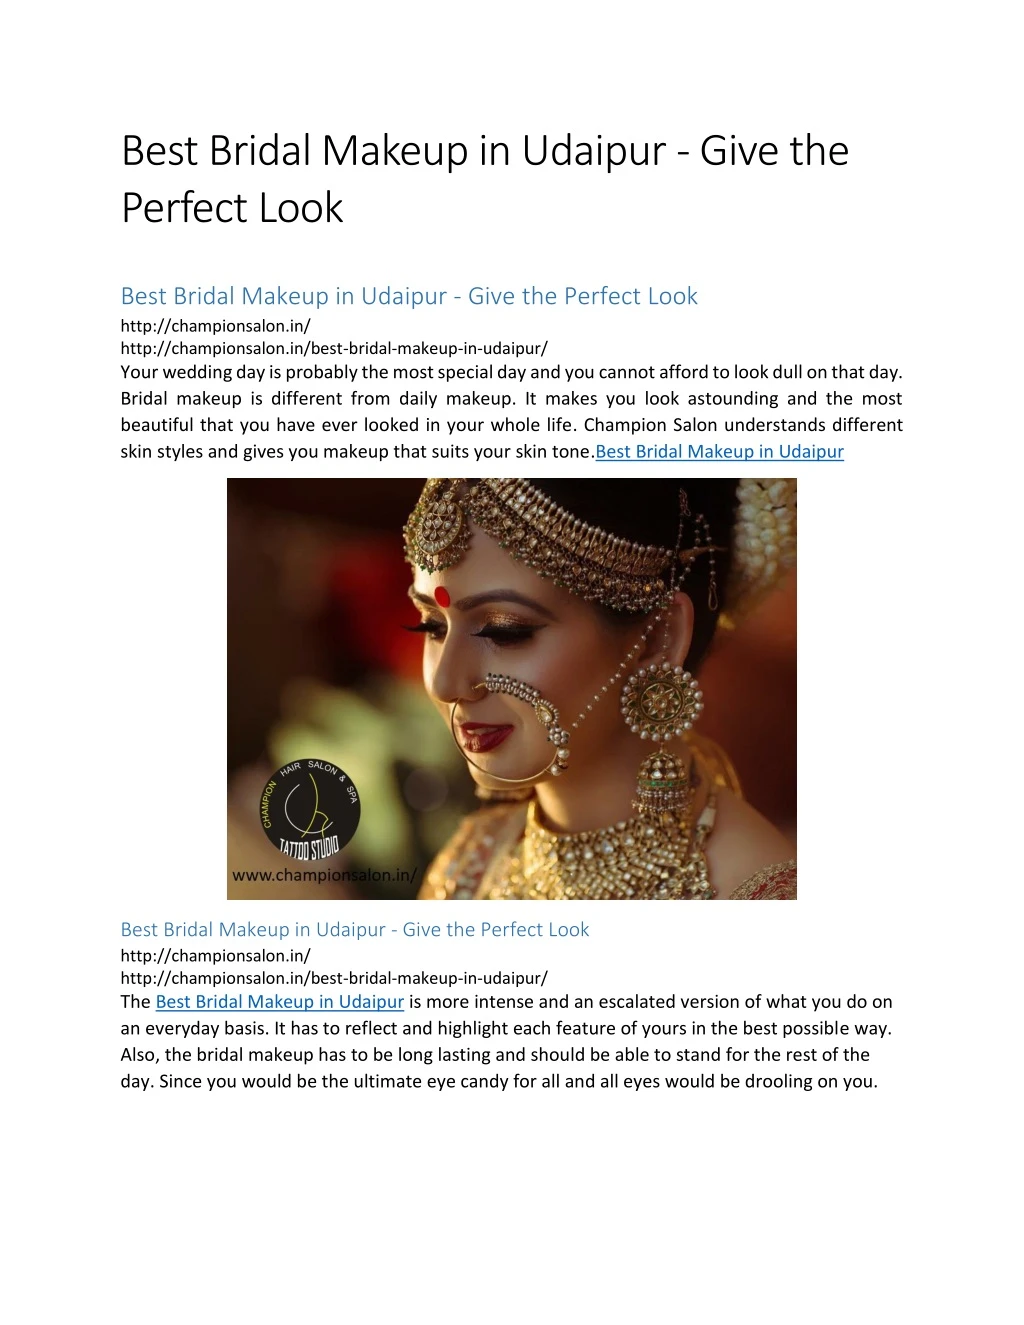 best bridal makeup in udaipur give the perfect